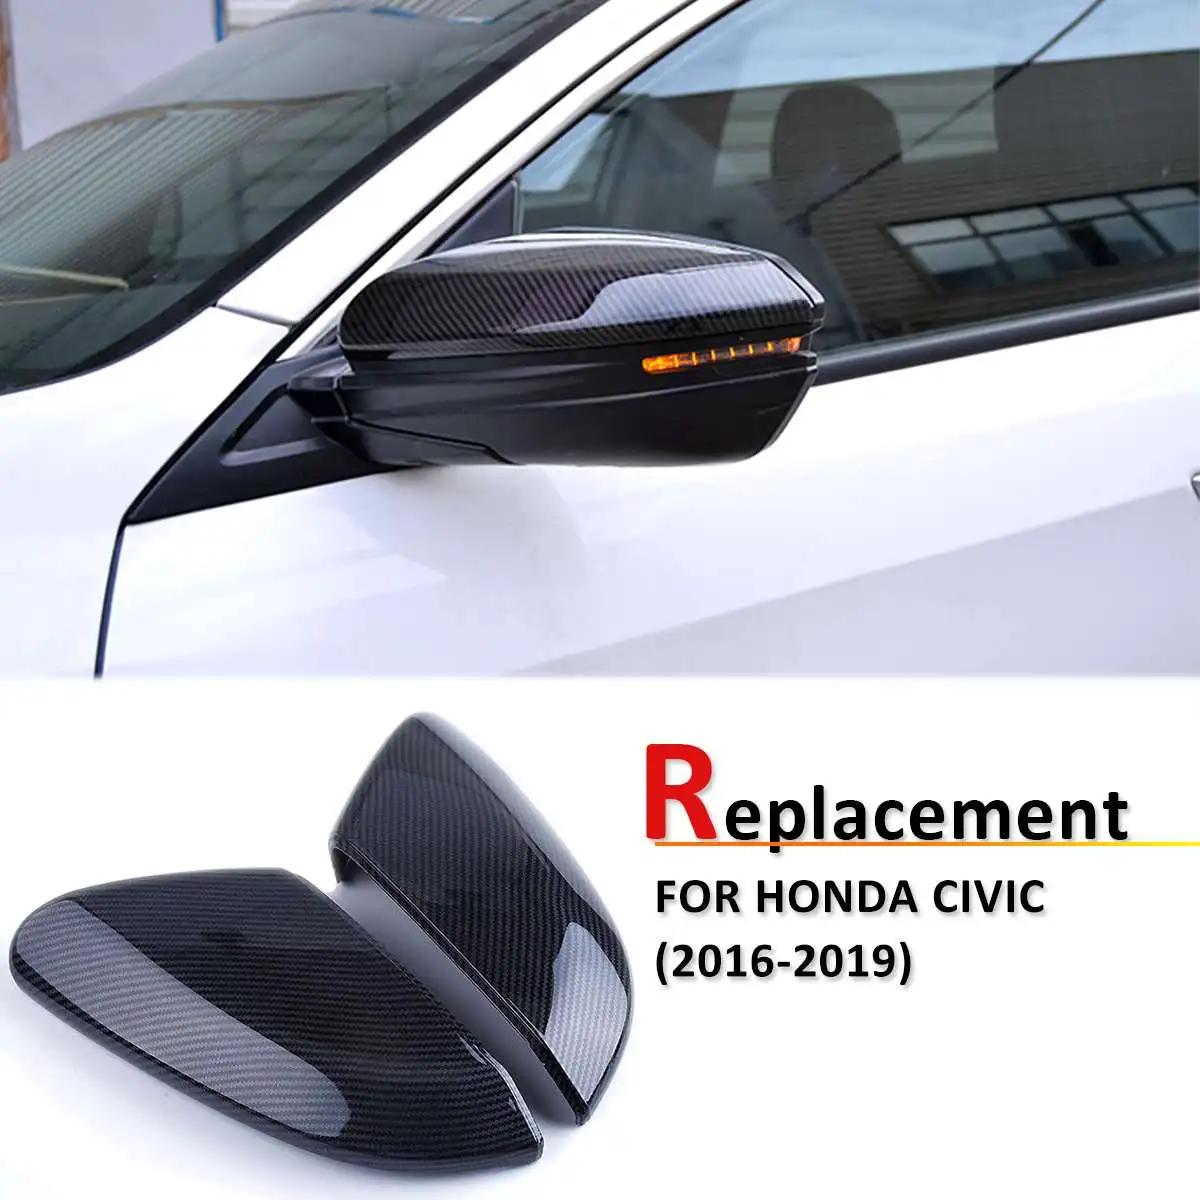 Cocas AX Side Door Mirror Carbon Fiber Style Rear View Rearview Caps Trim Car Covers Overlays Styling for Honda Civic 2016 2017 2018 